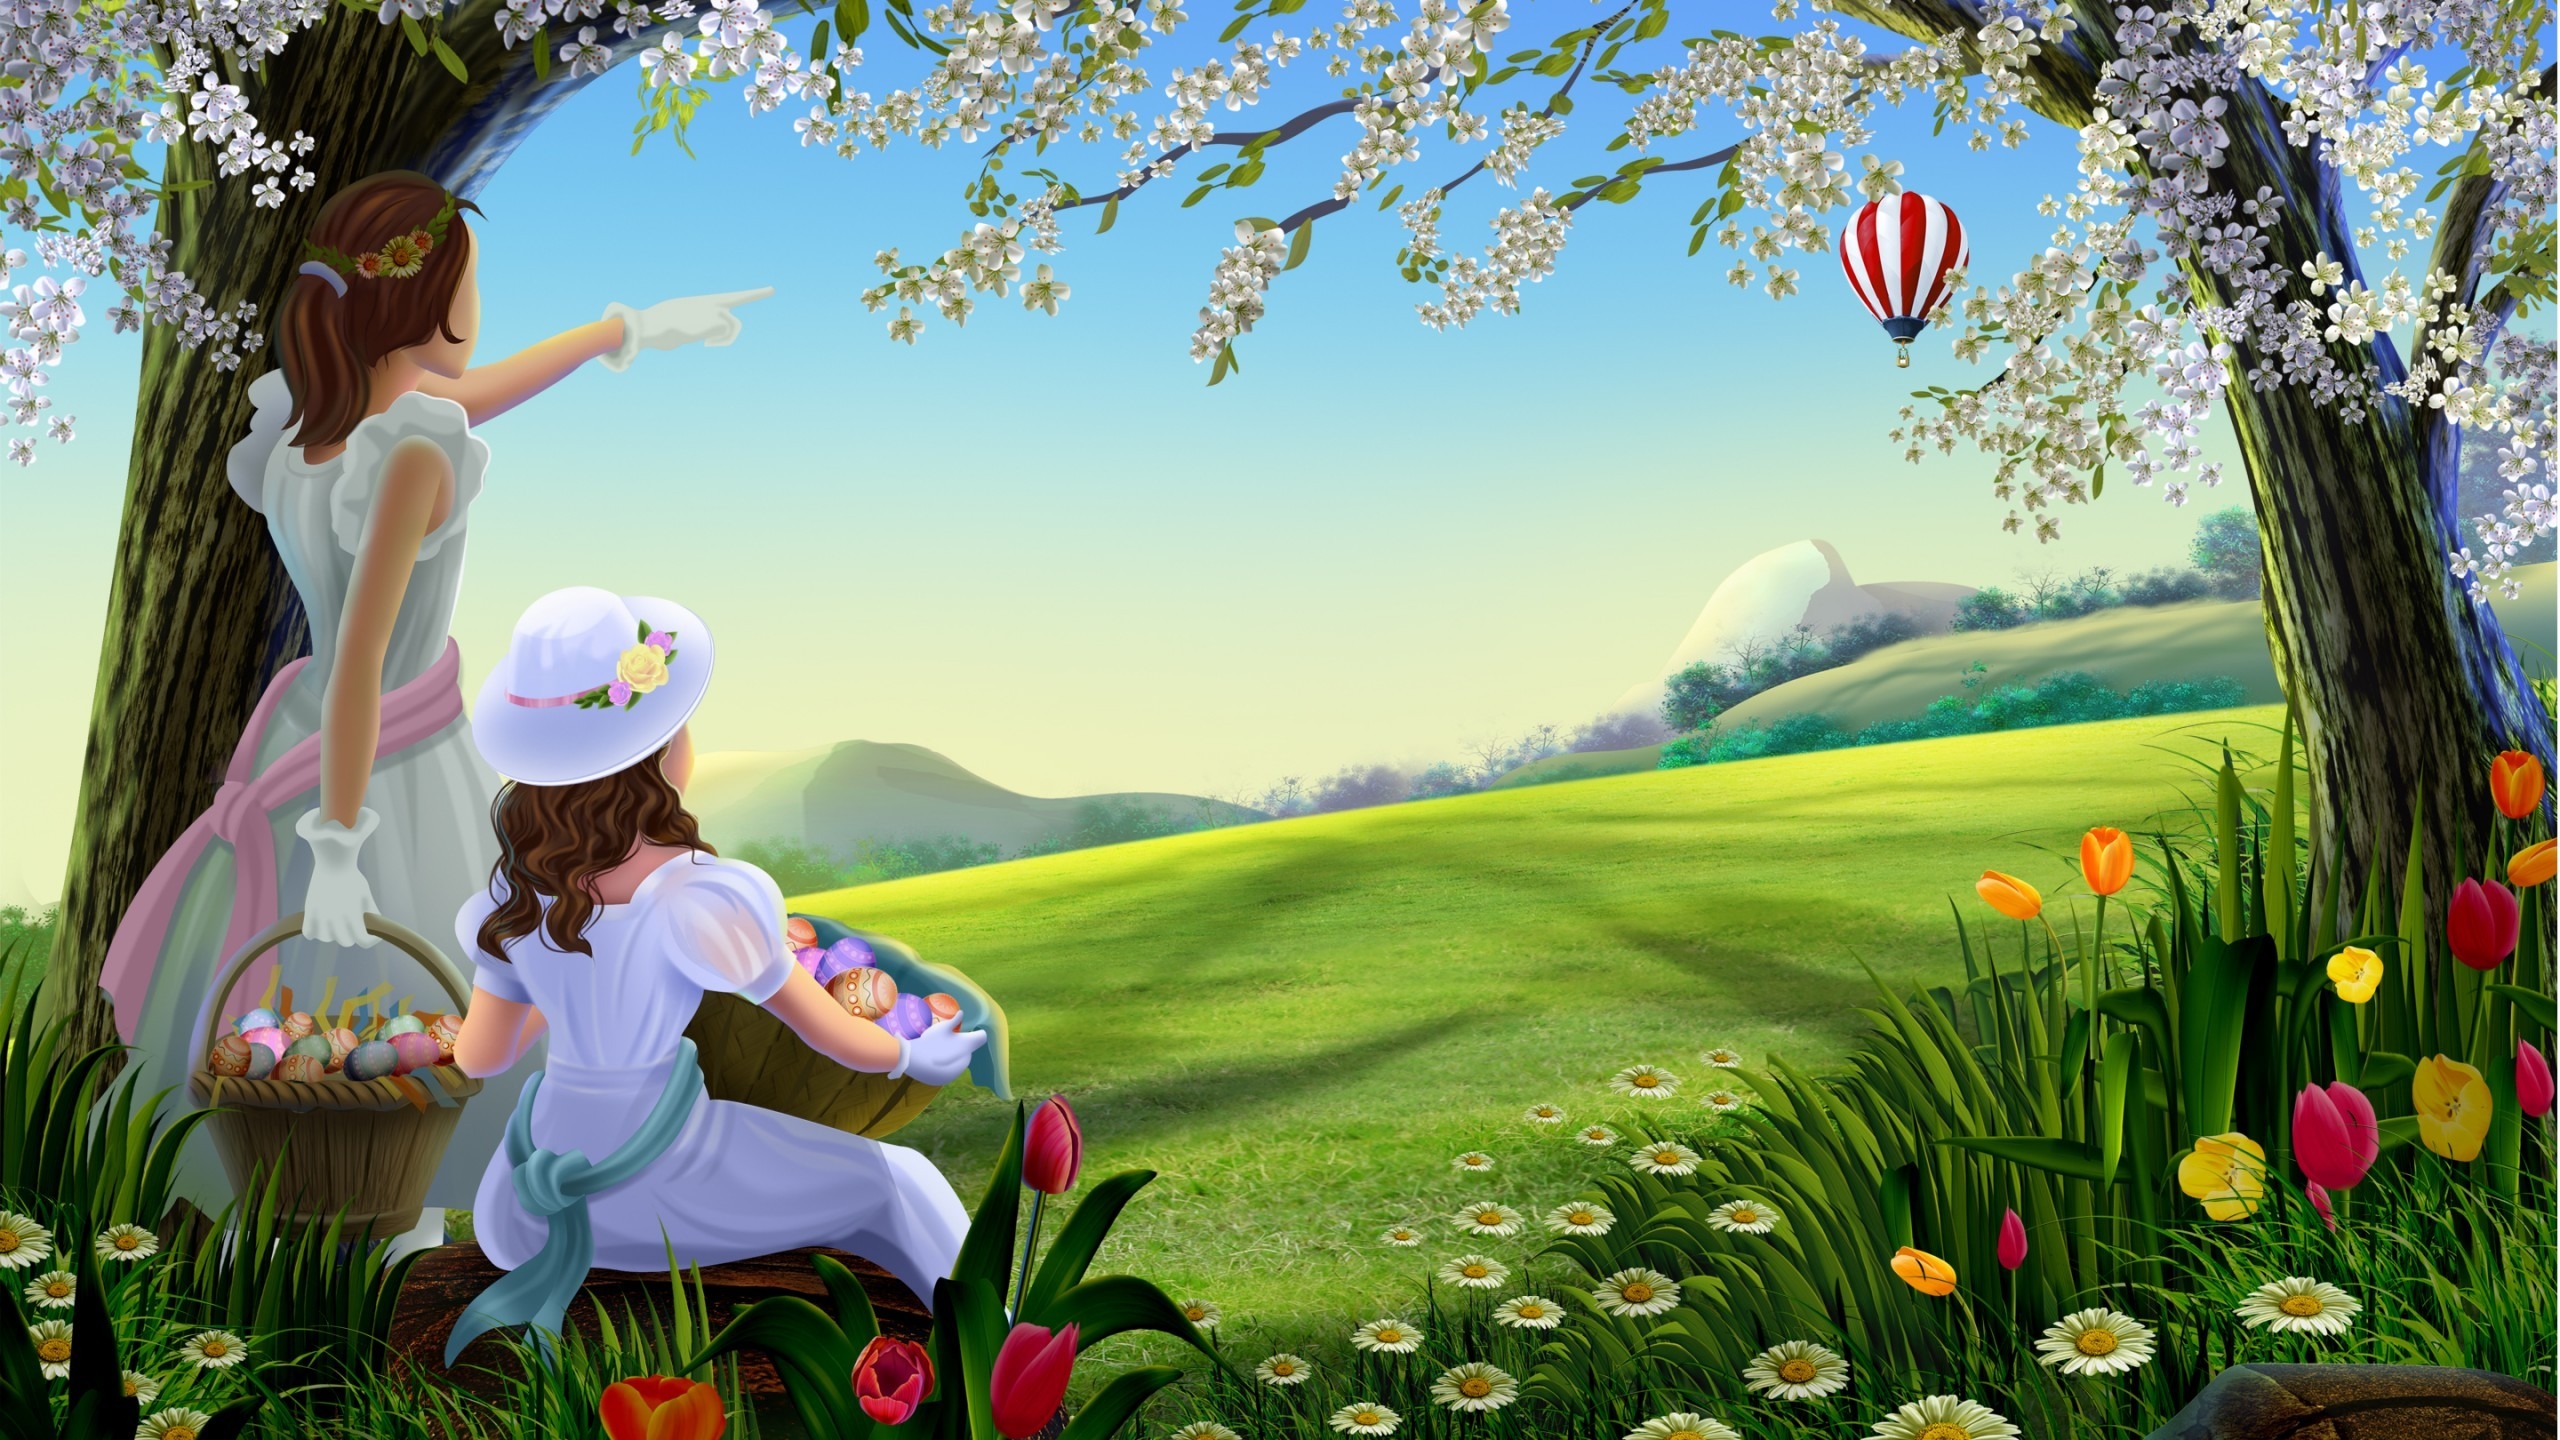 Amazing Spring Painting for 2560x1440 HDTV resolution